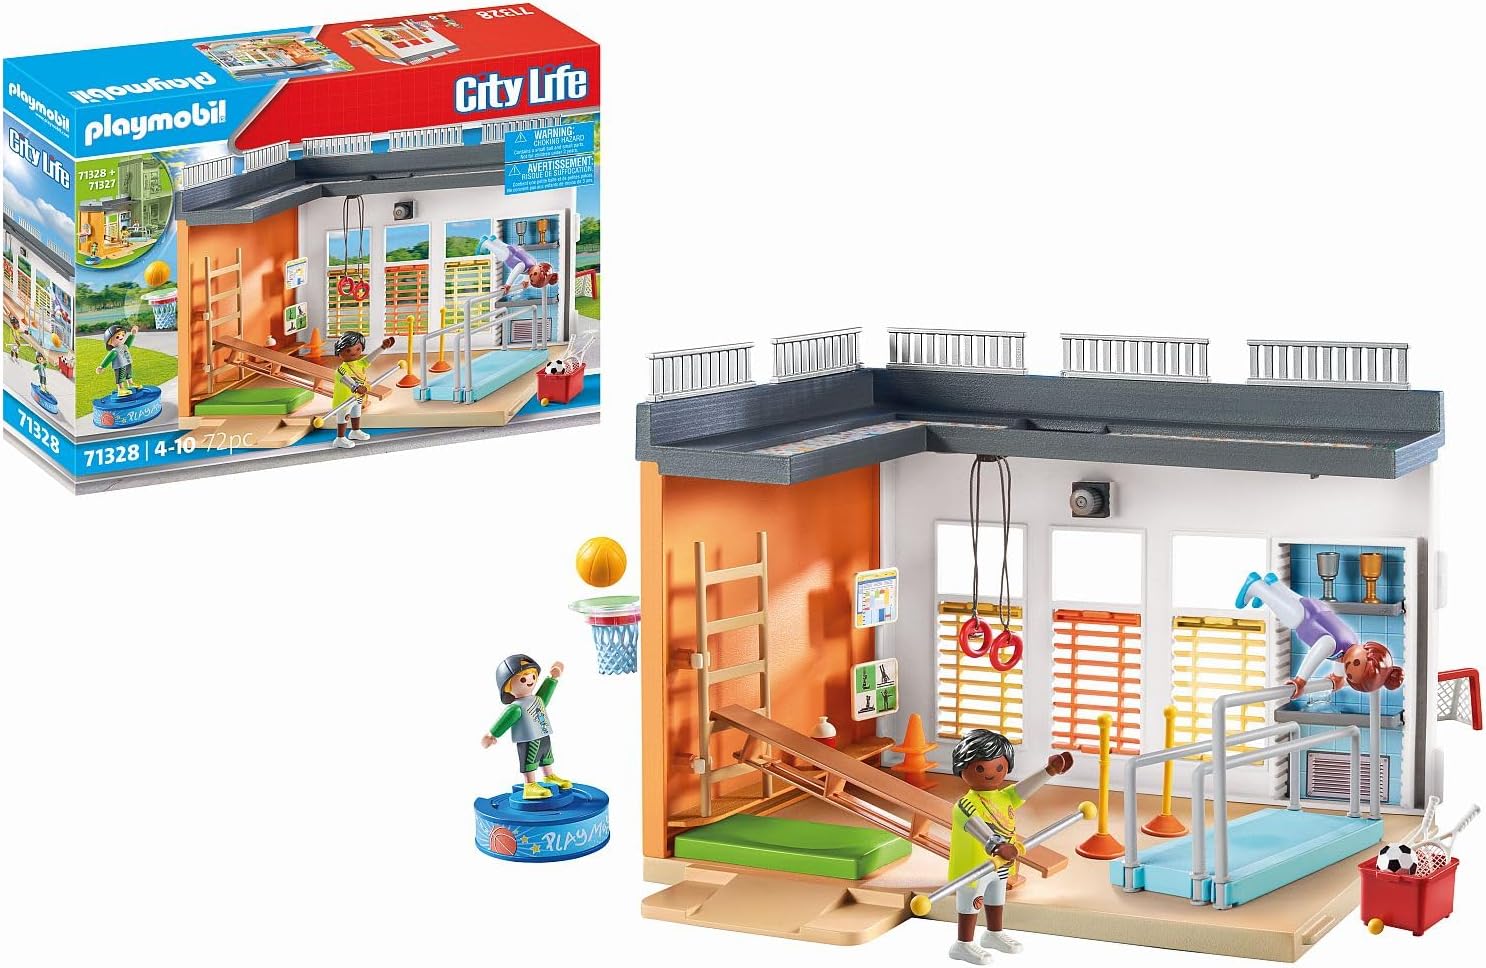 PLAYMOBIL City Life 71328 Extension Gym with Basketball Hoop, Slalom Poles, Football Goal, Tennis Accessories and More, Toy for Children from 4 Years